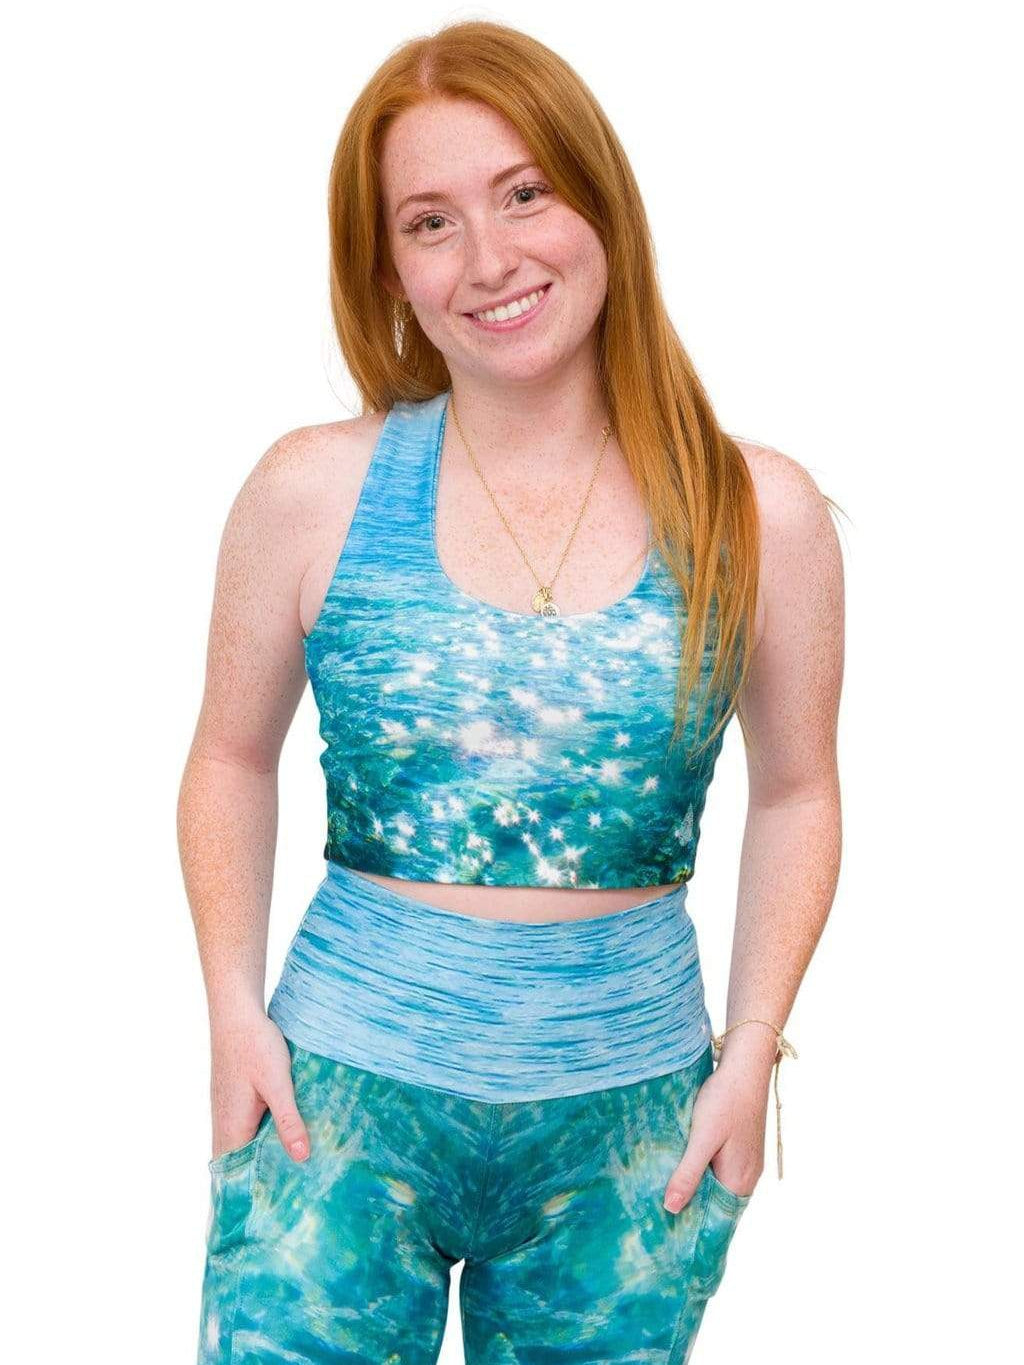 Model: Meggan is working on a masters degree in marine science and has worked as a coral scientist. She is 5'1", 105 lbs, 32A and is wearing an XS top and legging.